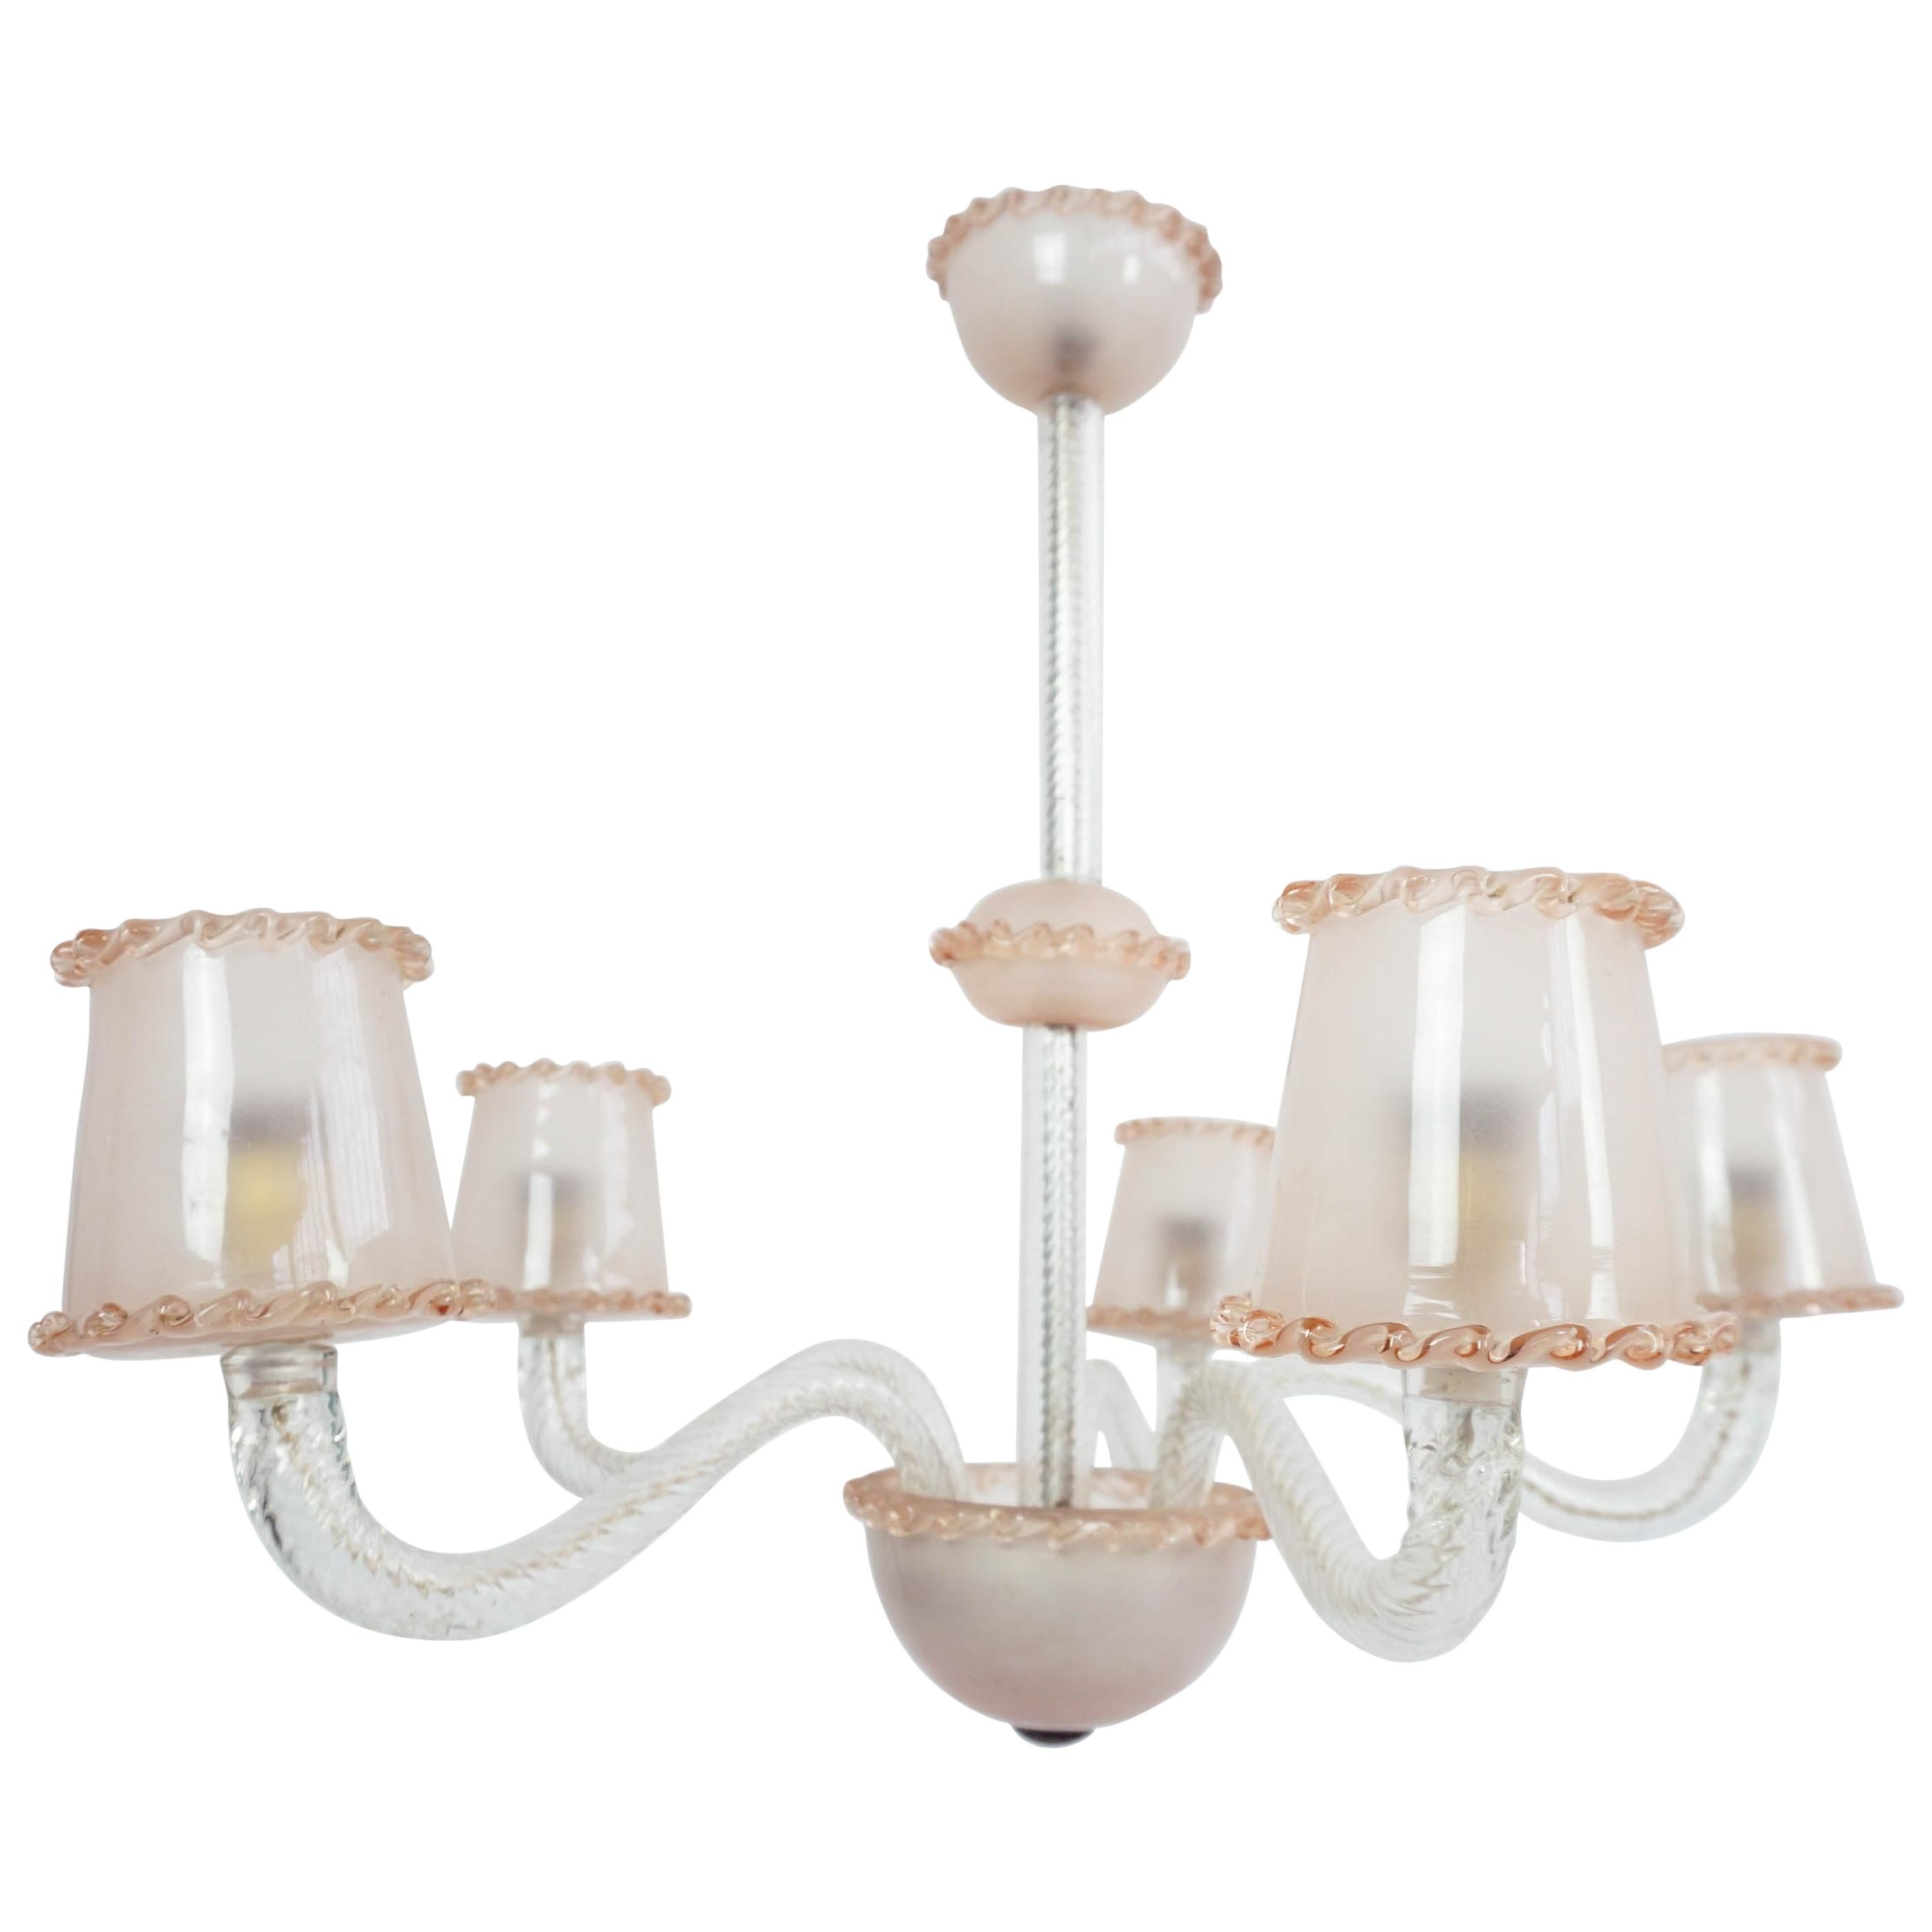 Ercole Barovier 1940 Pale Rose Massive Murano Glass 5 Arms Chandelier For Sale